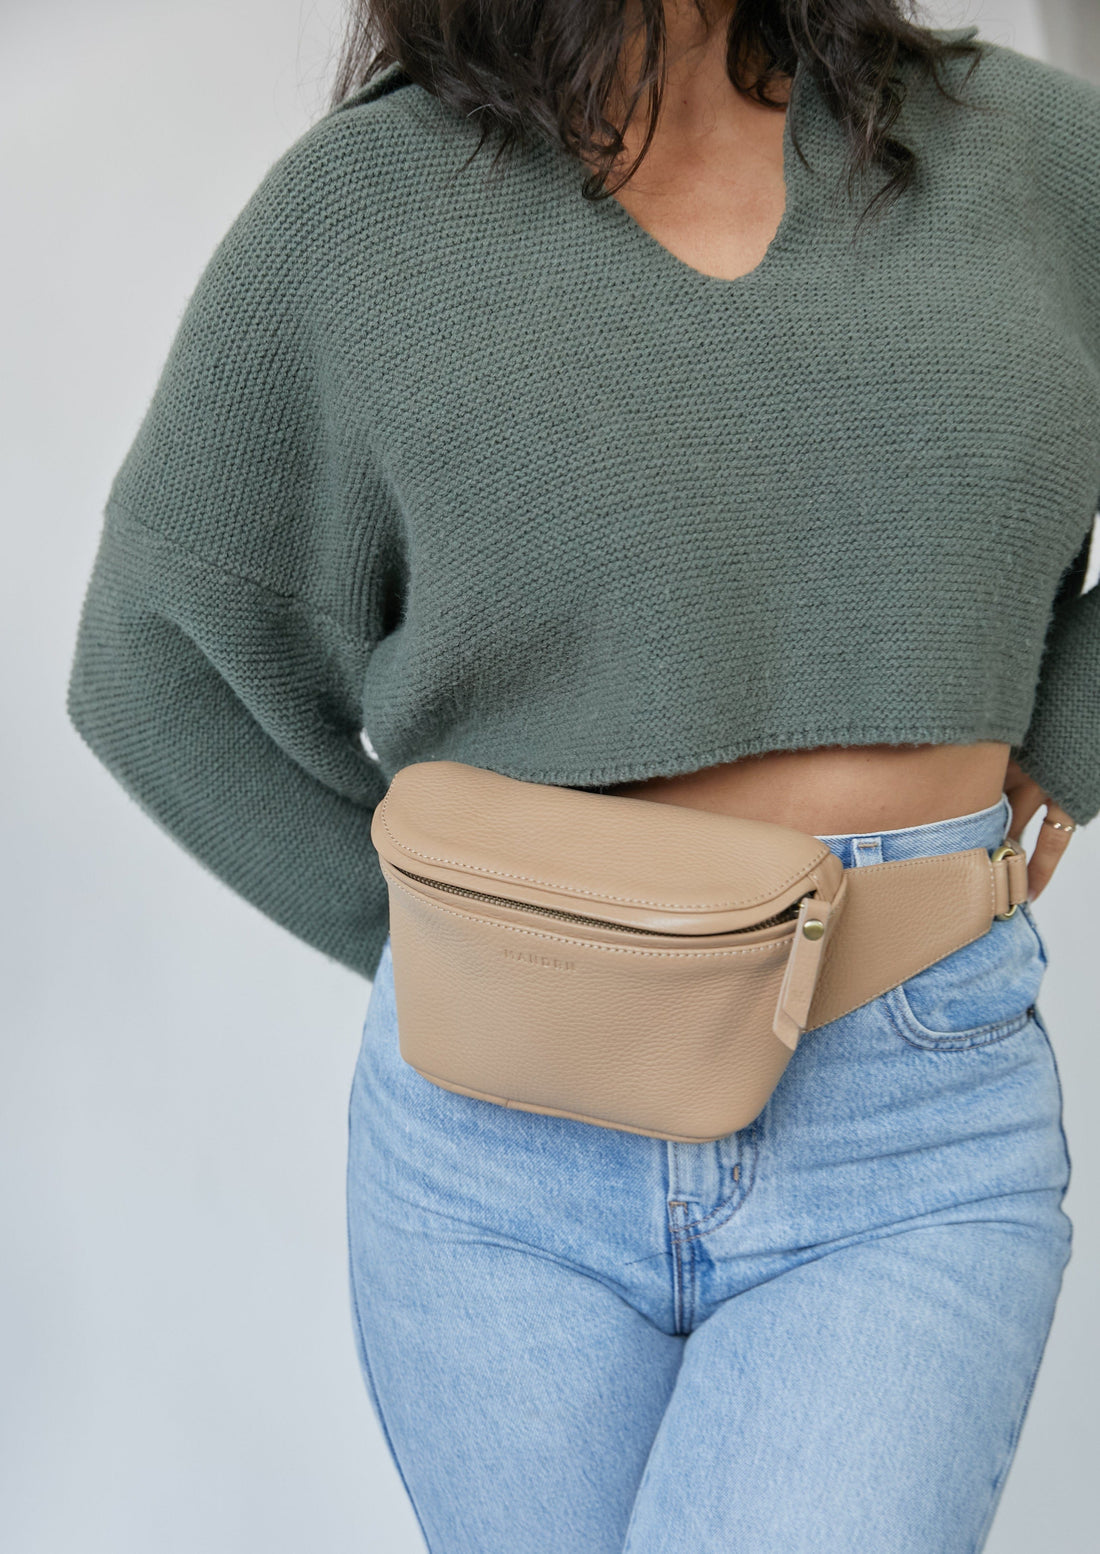 MANDRN  The Remy- Tan Leather Fanny Pack